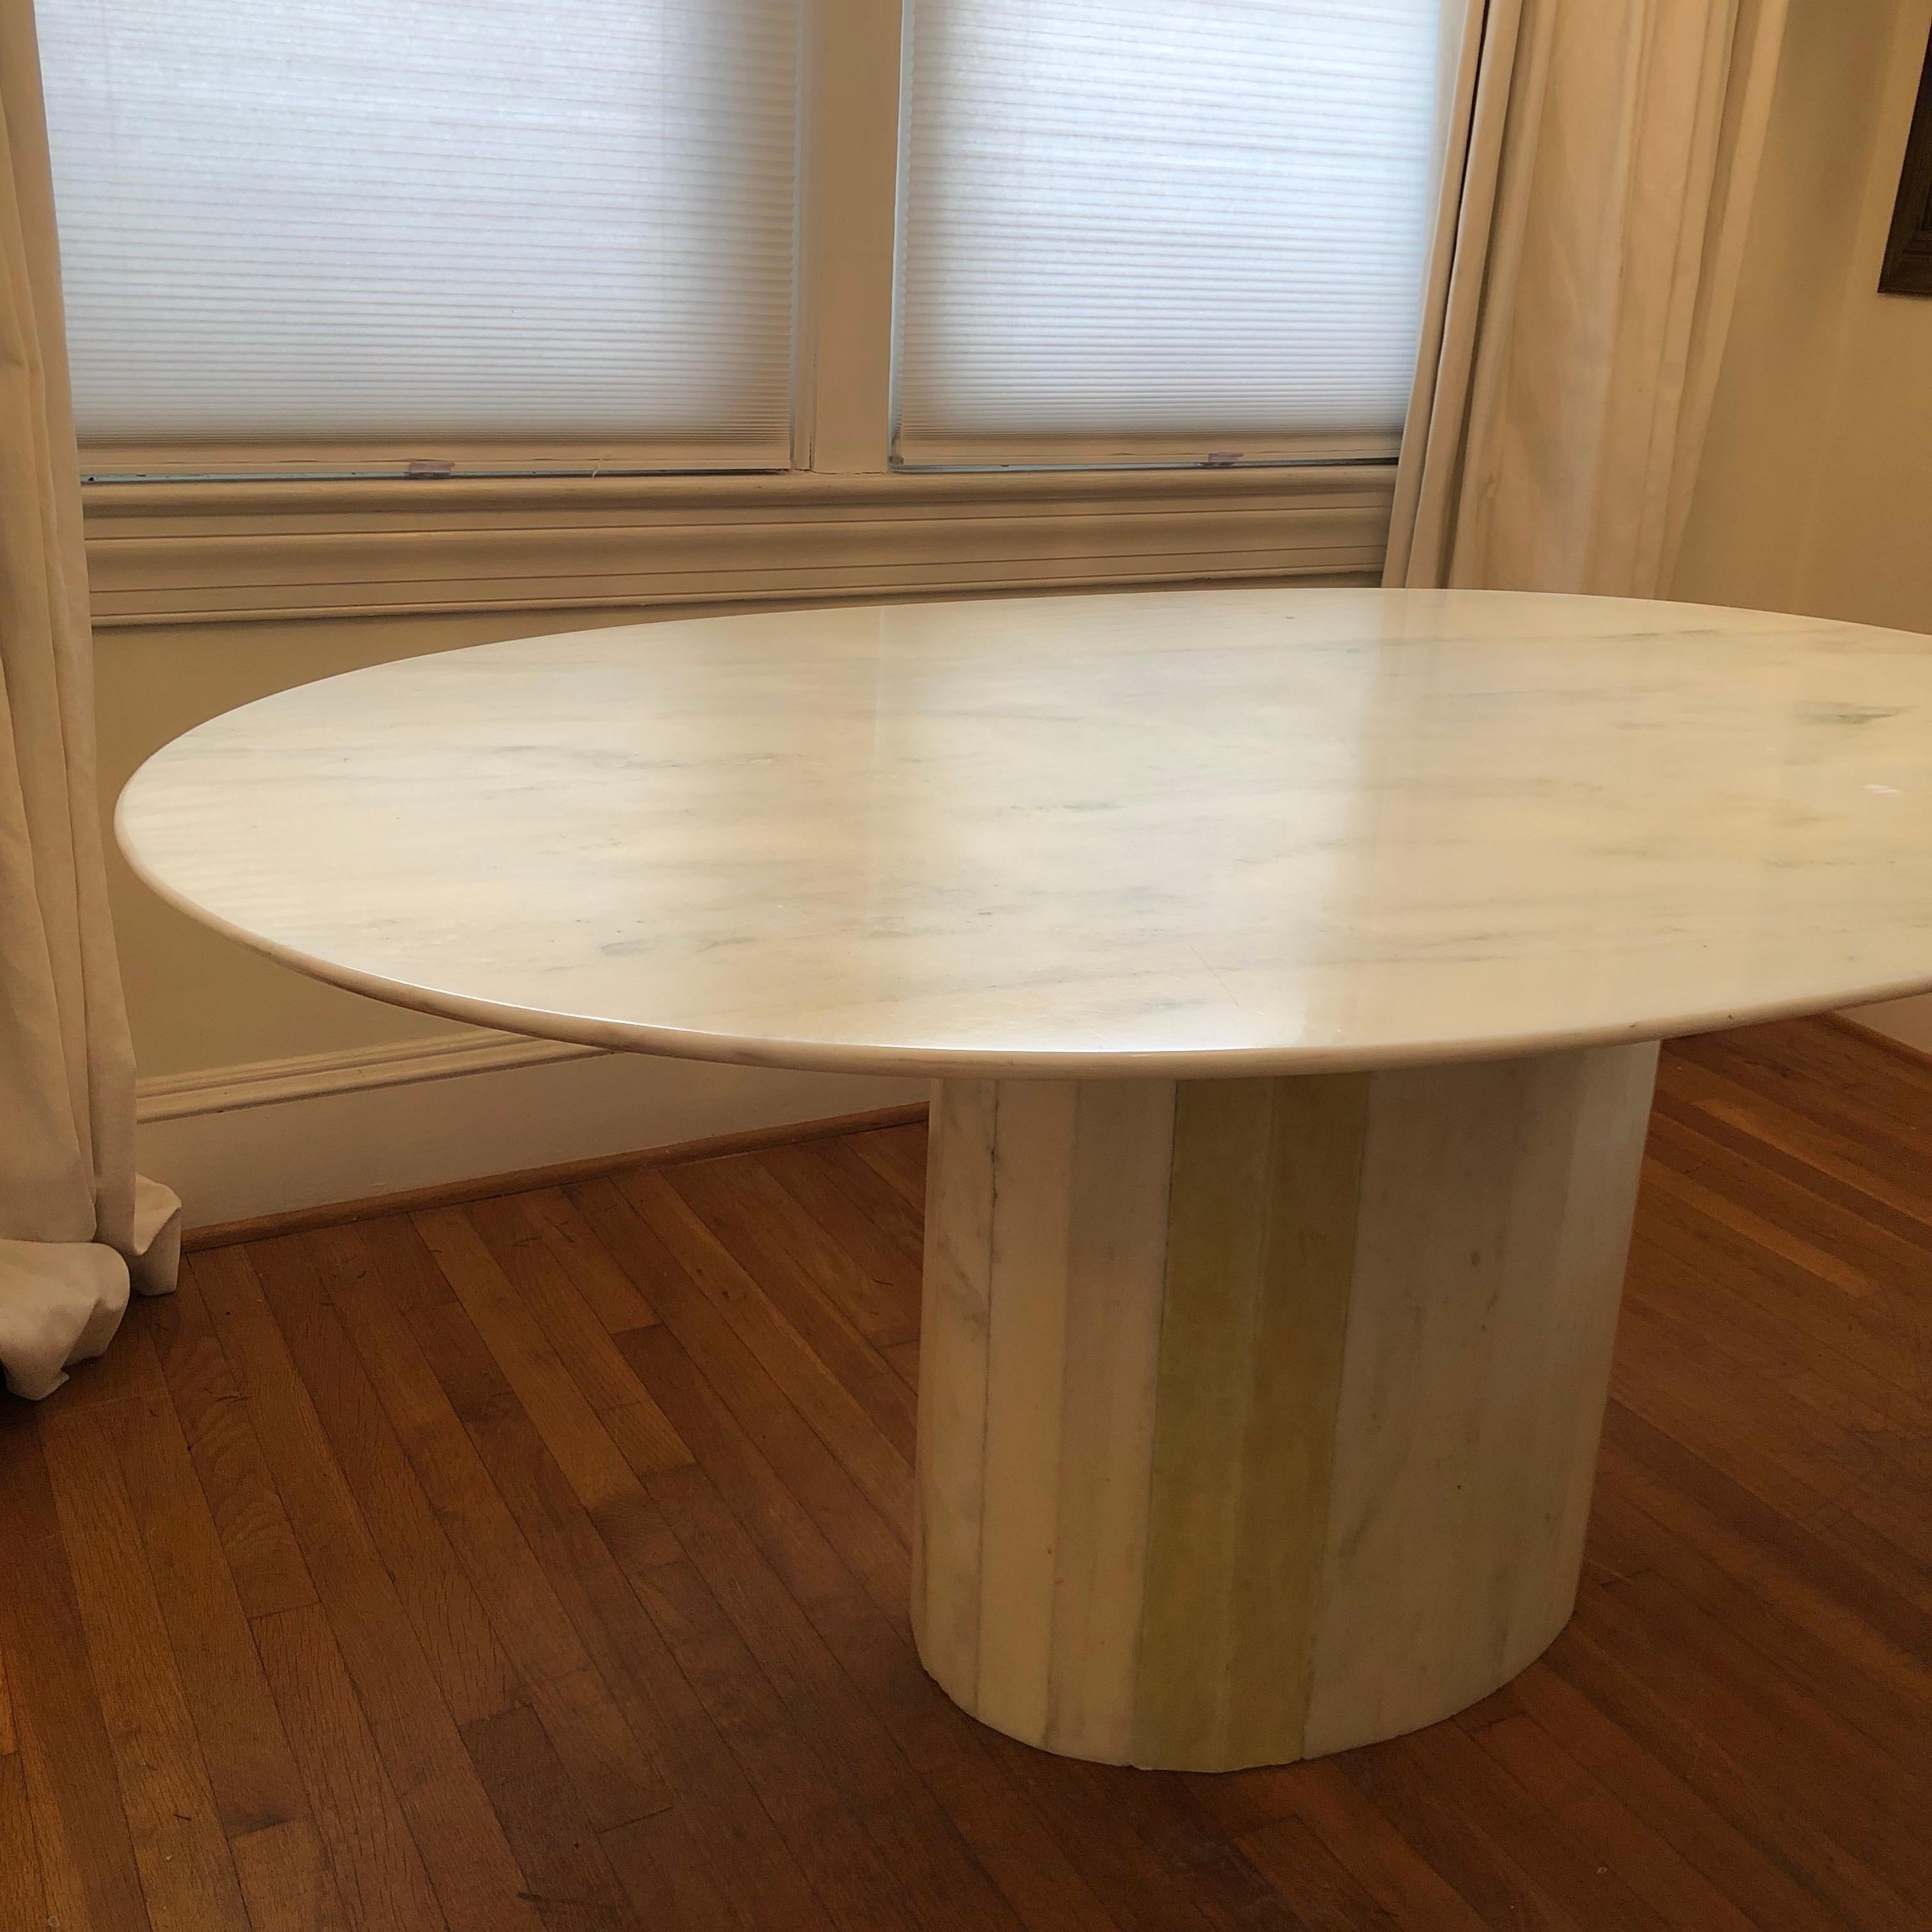 Beautiful ash marble with green veining. Oval shape top sits on matching pedestal base. 
Mid-Century style fits well in contemporary or modern home. 

Measures 65 x 39.5 x 28.5 

Offering this table at a discount as it does have a small chip on